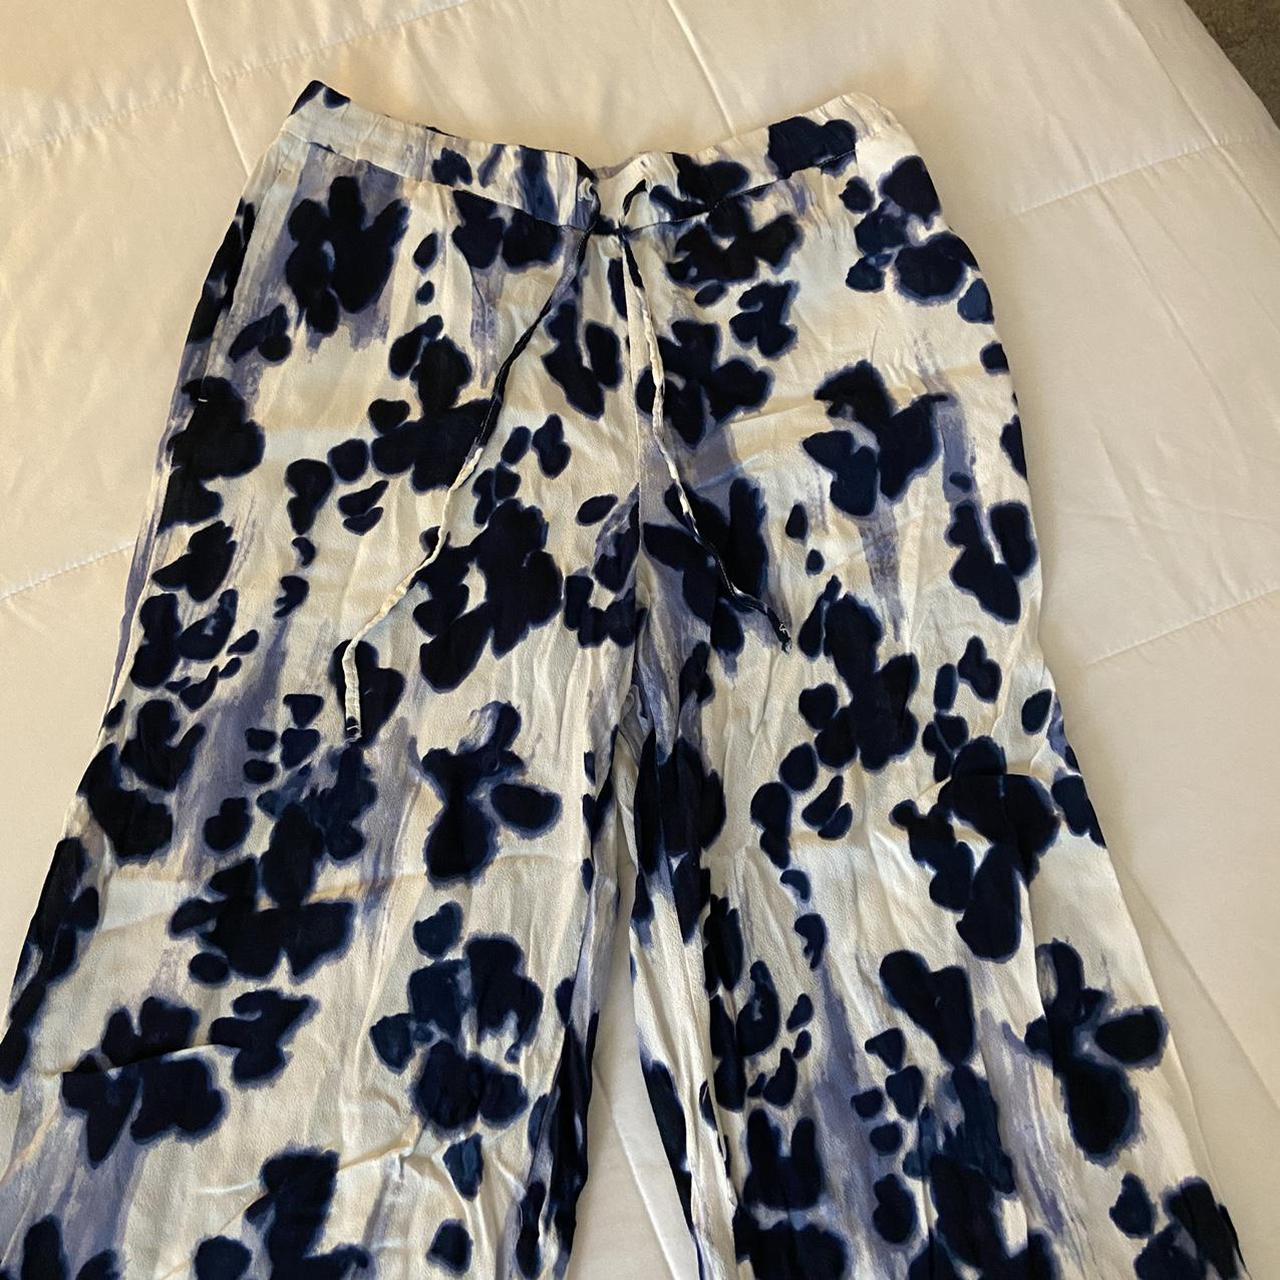 Product Image 1 - White and Blue Flowy Pants

From